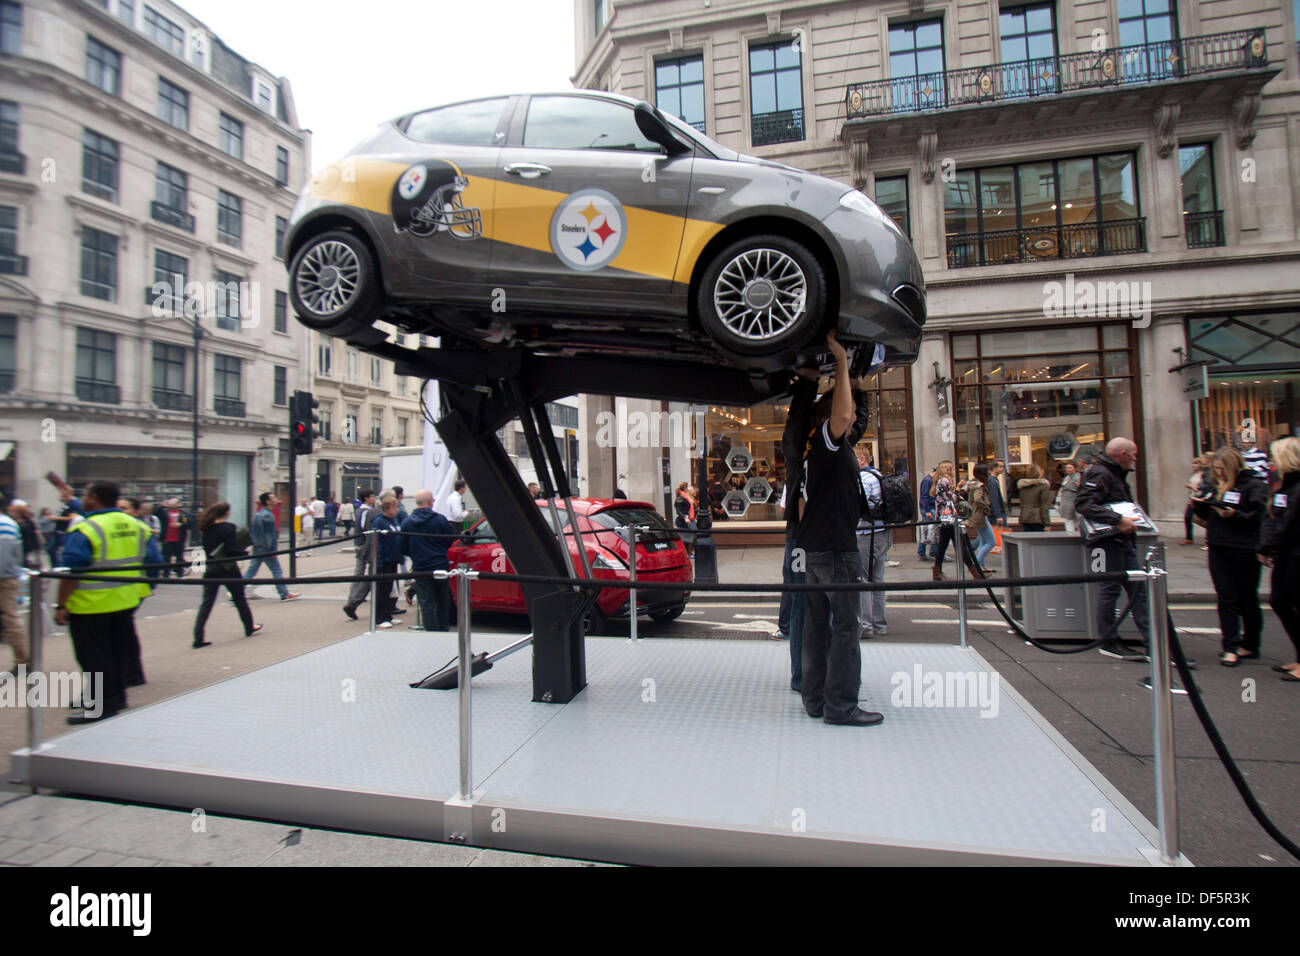 London, UK. 28th Sep, 2013. 28th September 2013. London UK. Fans pretend to lift a Pittsburgh Steelers promotion car as thousands of fans attend an American style block party in Regents street ahead of the NFL game between the Minnesota Vikings and Pitsburgh Steelers which will be played at Wembley stadium on sunday september 29. Credit:  amer ghazzal/Alamy Live News Stock Photo